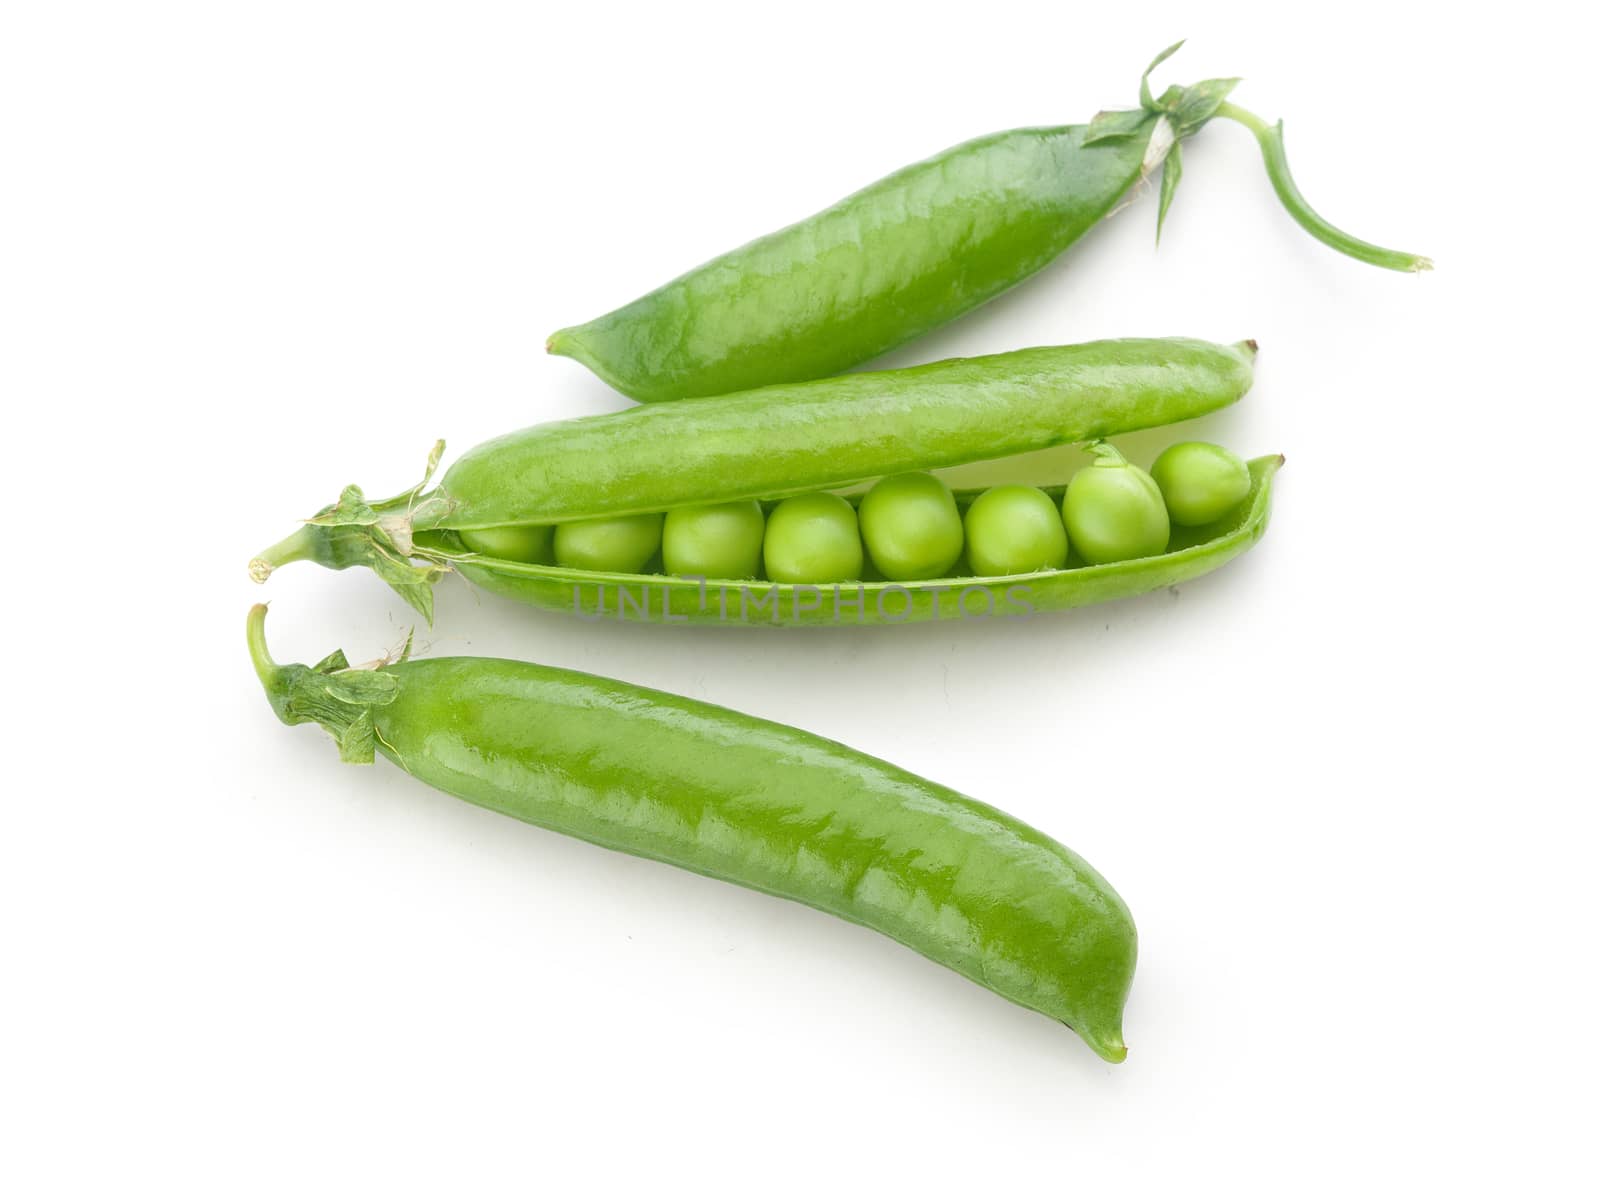 Fresh green pea pods and peas by Angorius